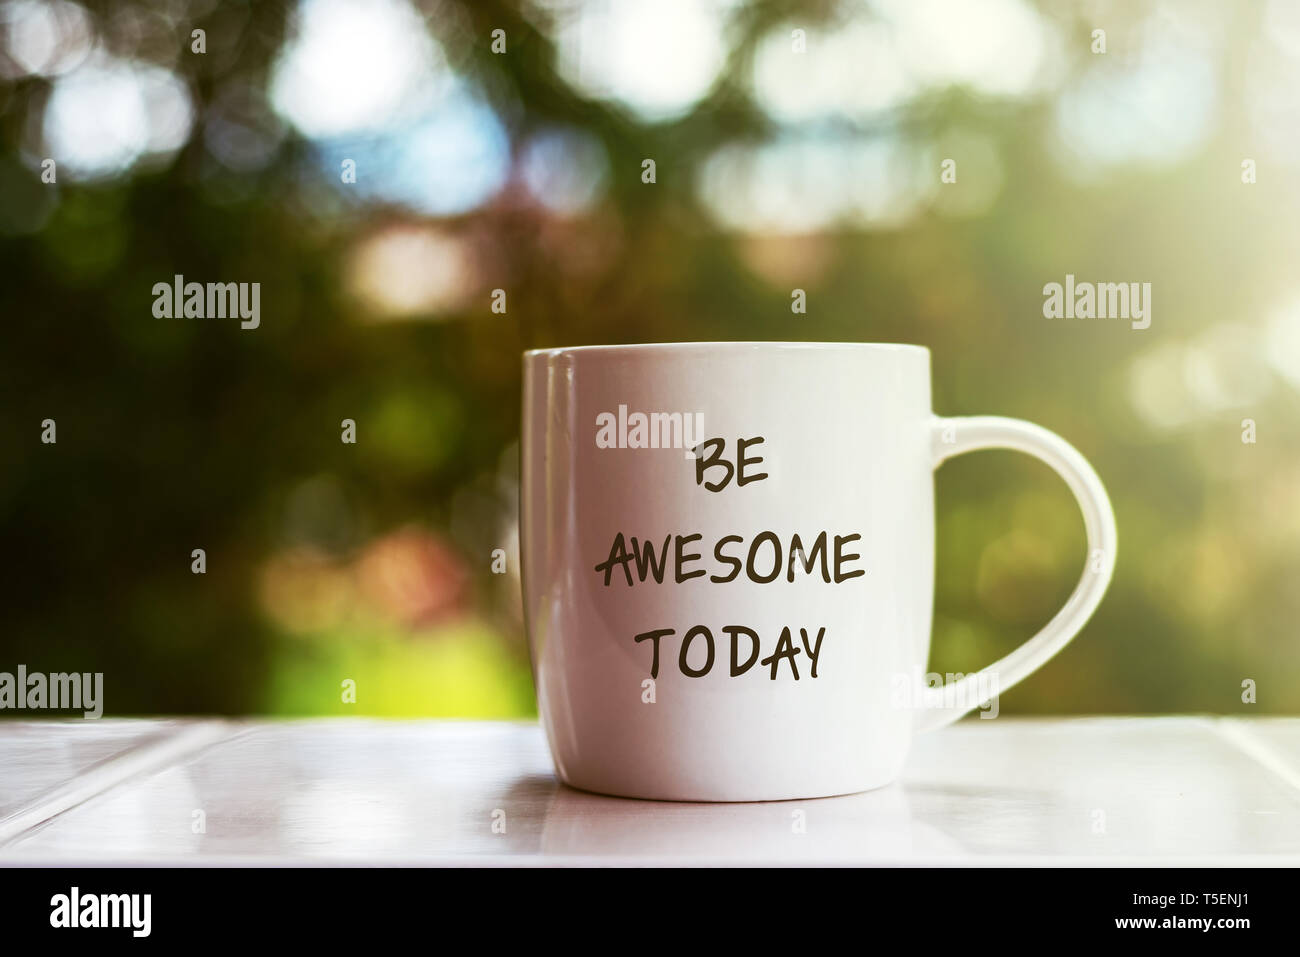 Inspirational quotes text on coffee mug - Be awesome today Stock Photo -  Alamy